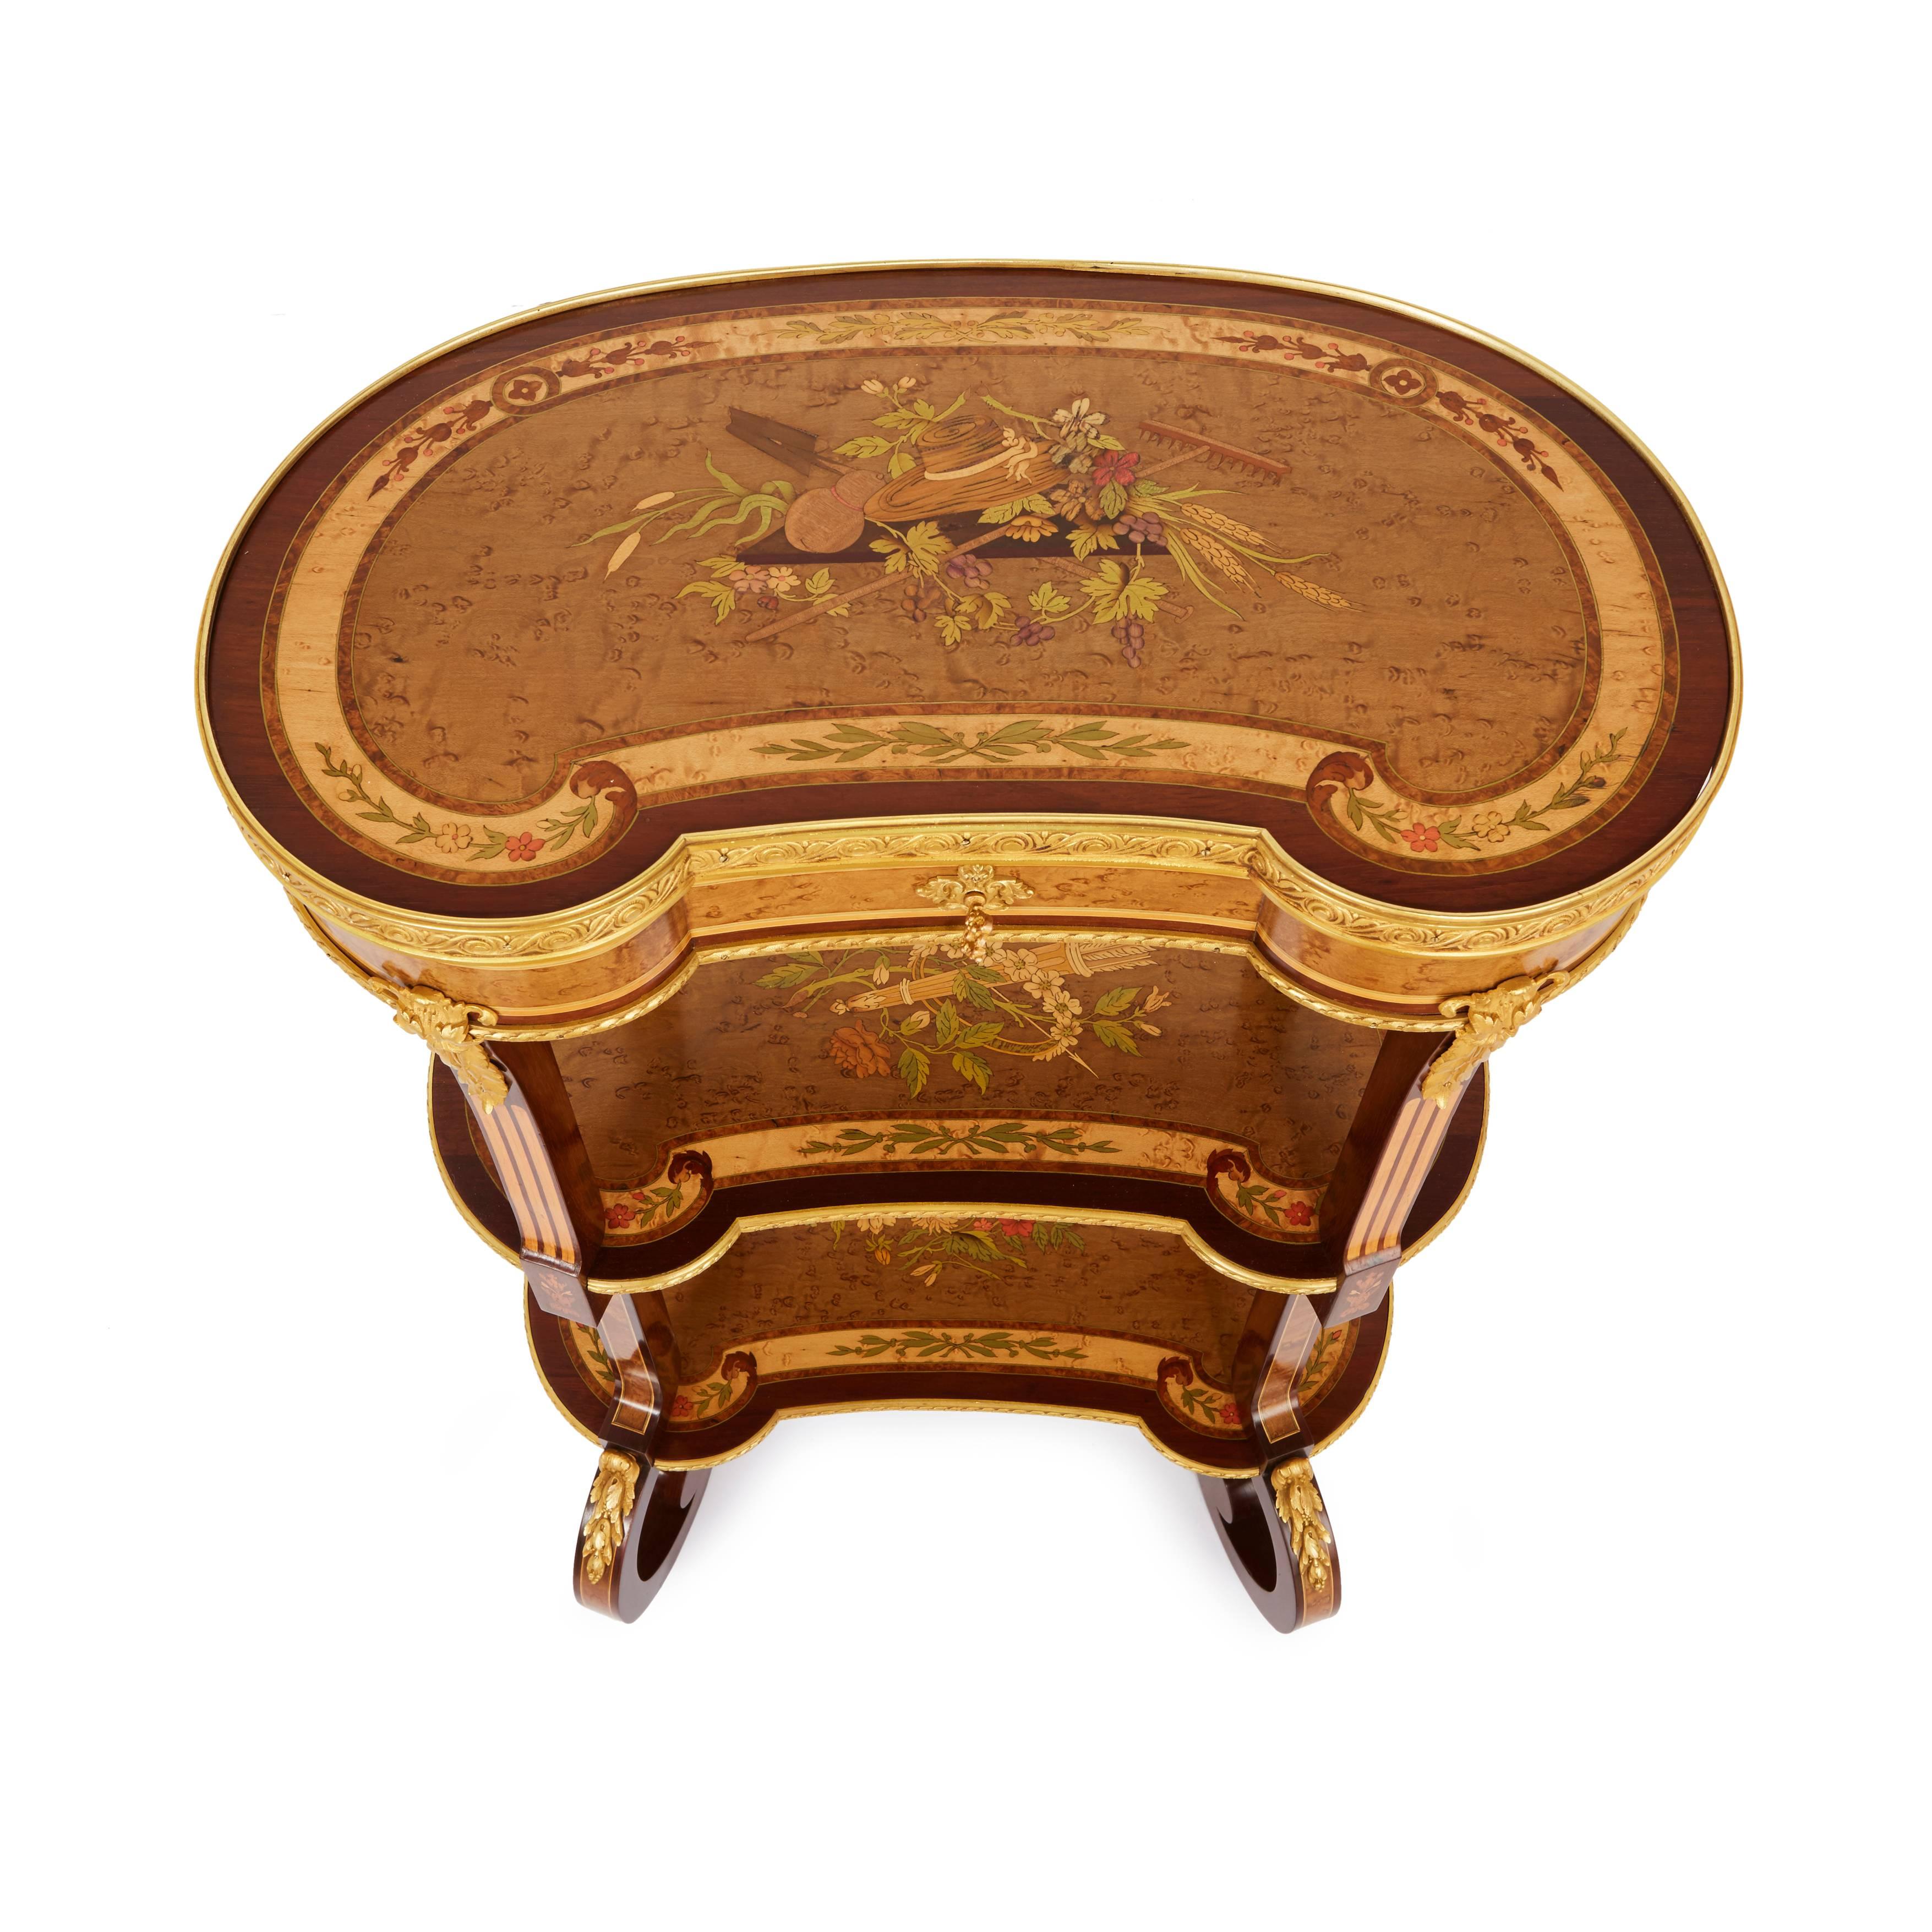 Finely inlaid marquetry with various precious woods, the hinged top with mirror to interior, stamped 'P. Sormani 10 RUE CHARLOT PARIS'

Born in the Kingdom of Lombardy, Venice, in 1817, Paul Sormani moved to Paris and produced standard and fantasy